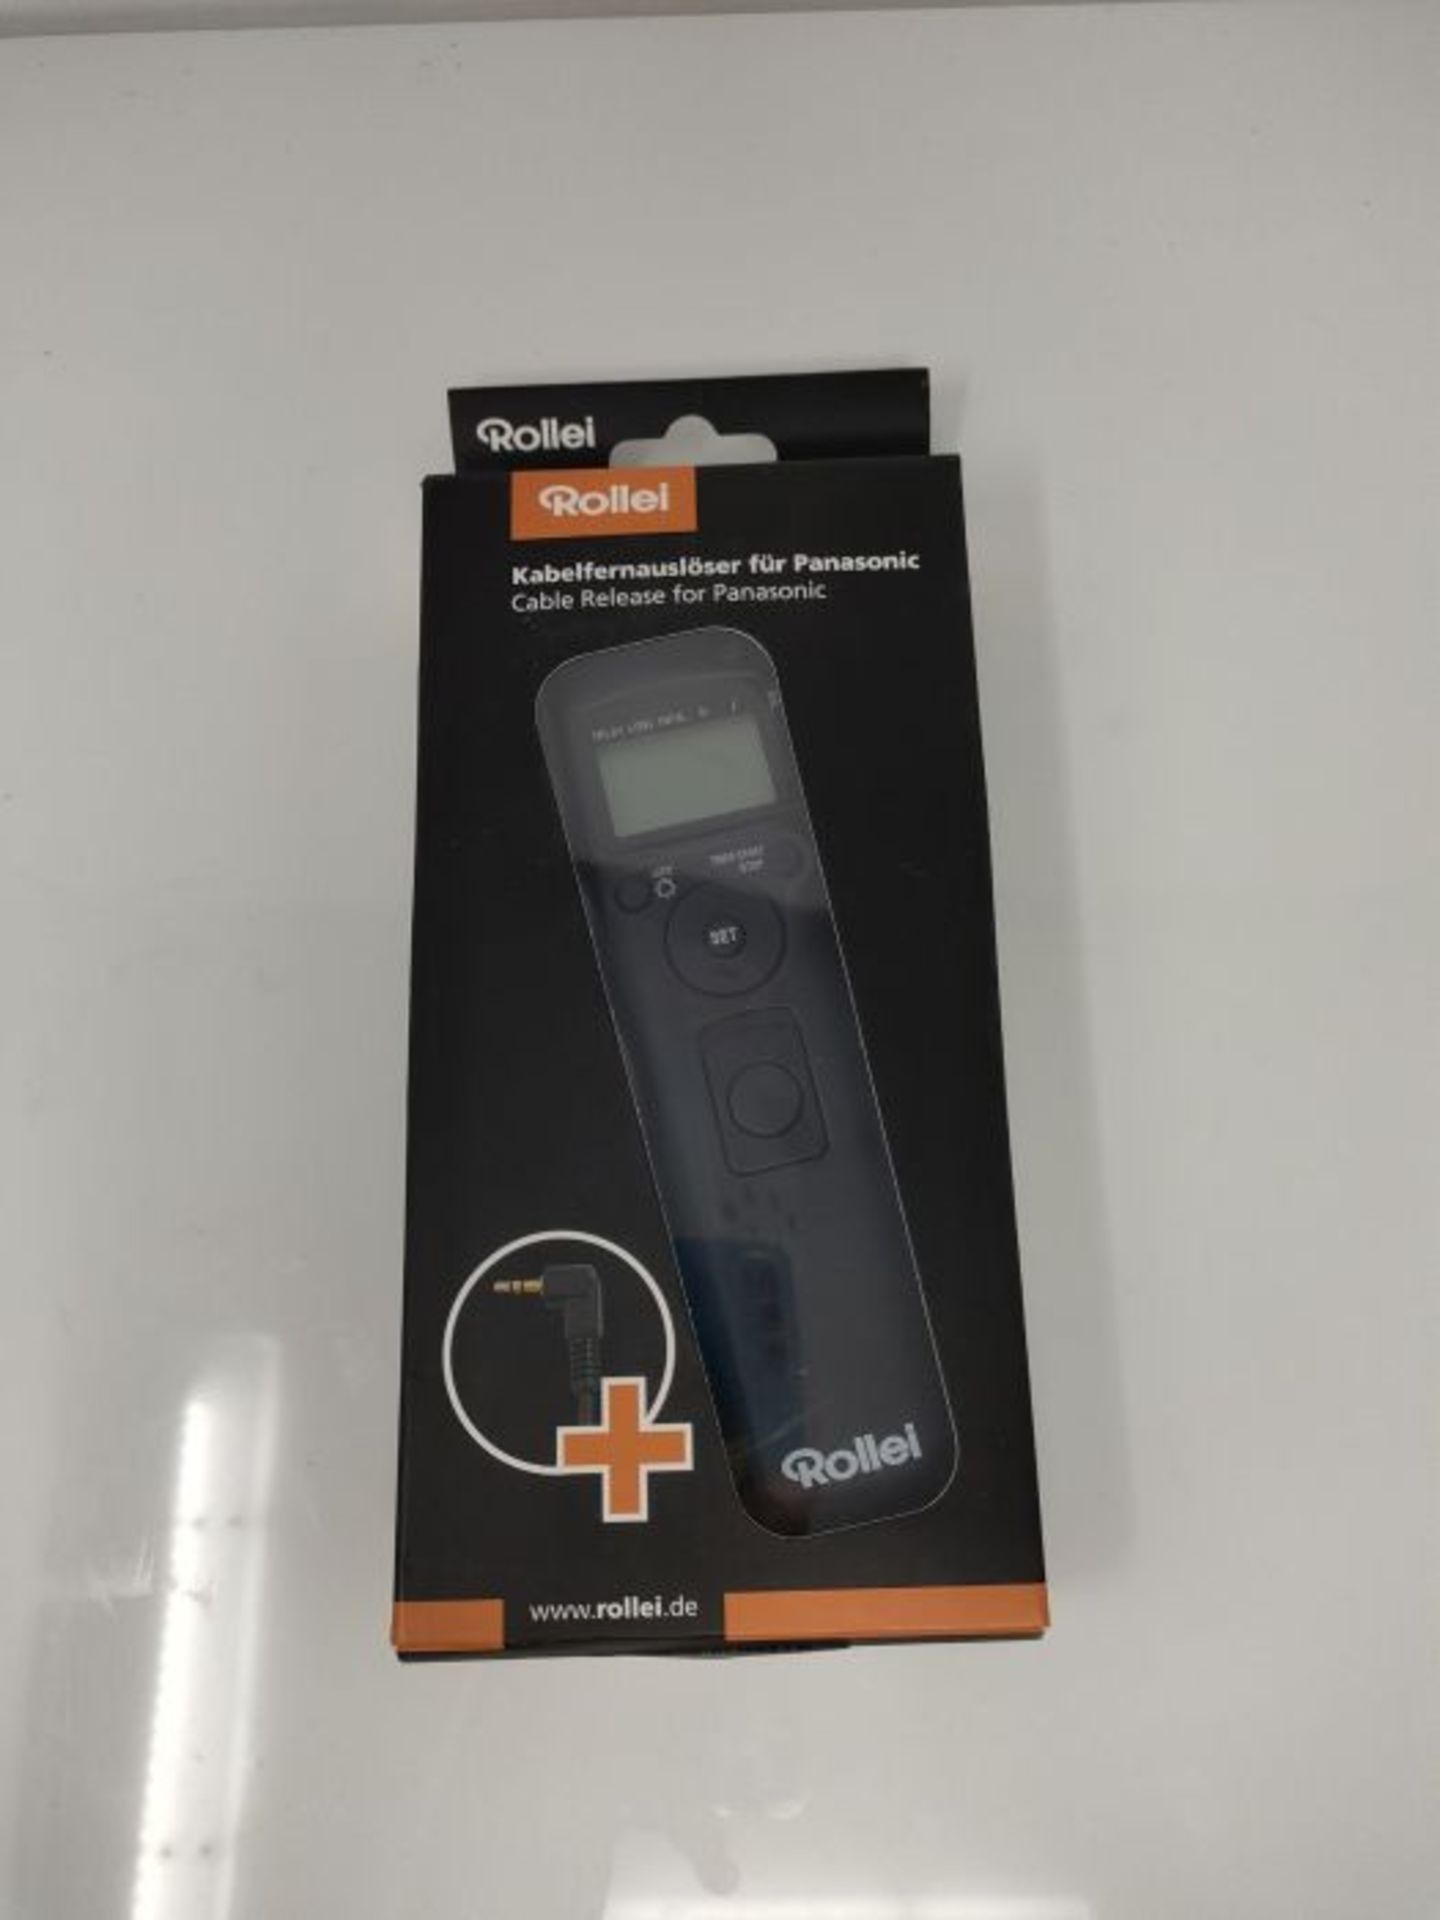 Rollei Cable Remote Release, Easy To Use, Illuminated LCD Display, Black - Image 2 of 3